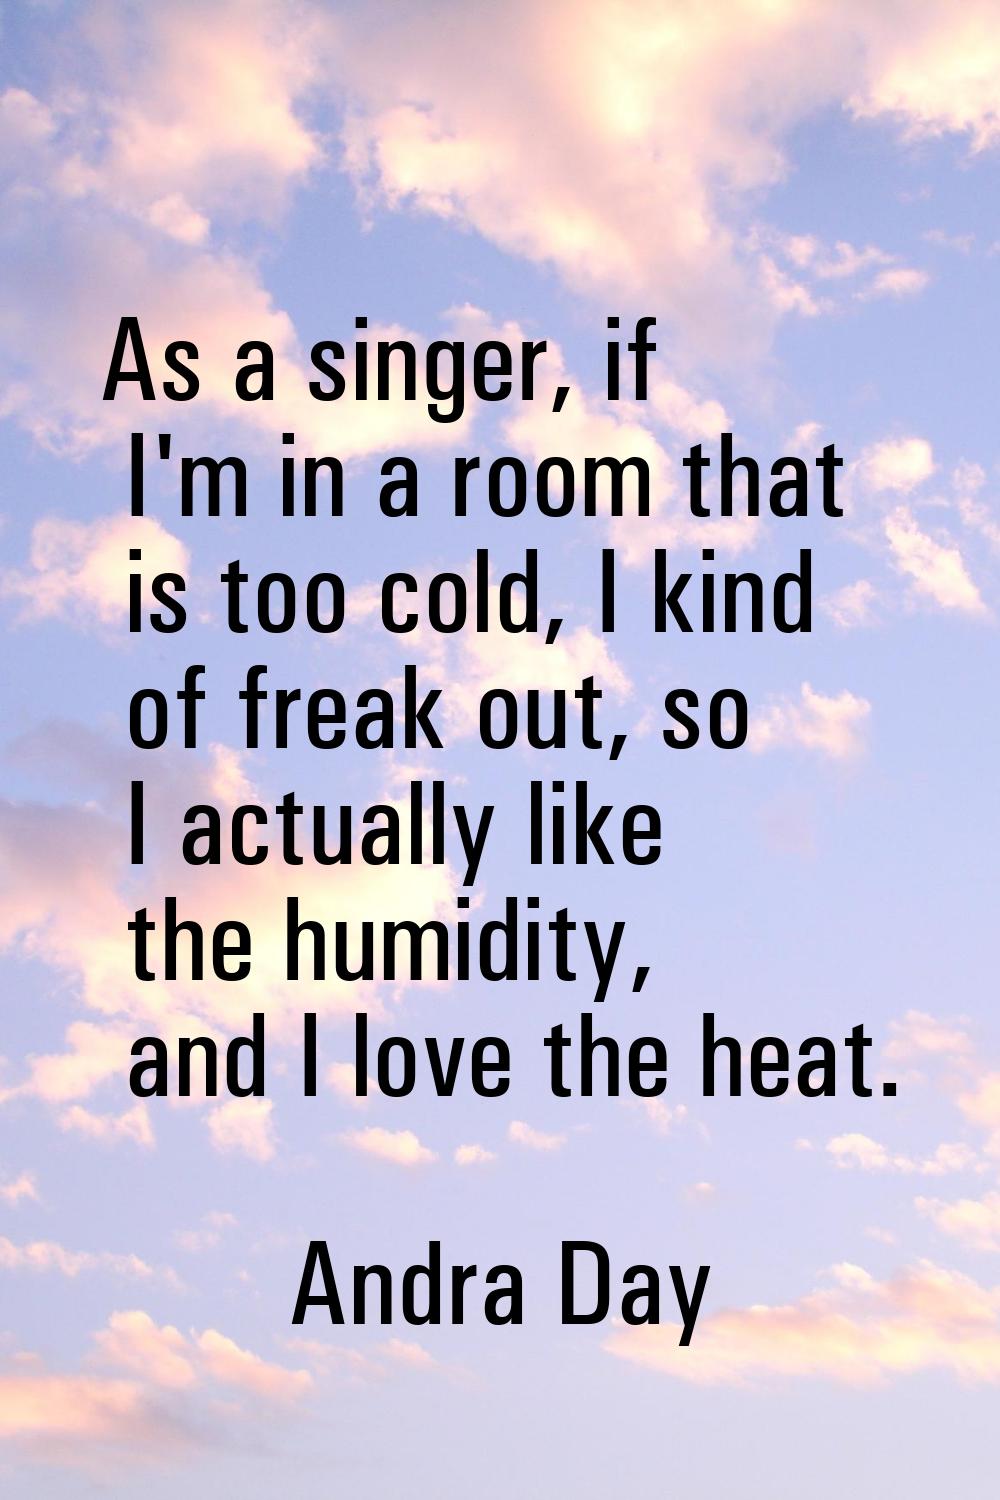 As a singer, if I'm in a room that is too cold, I kind of freak out, so I actually like the humidit